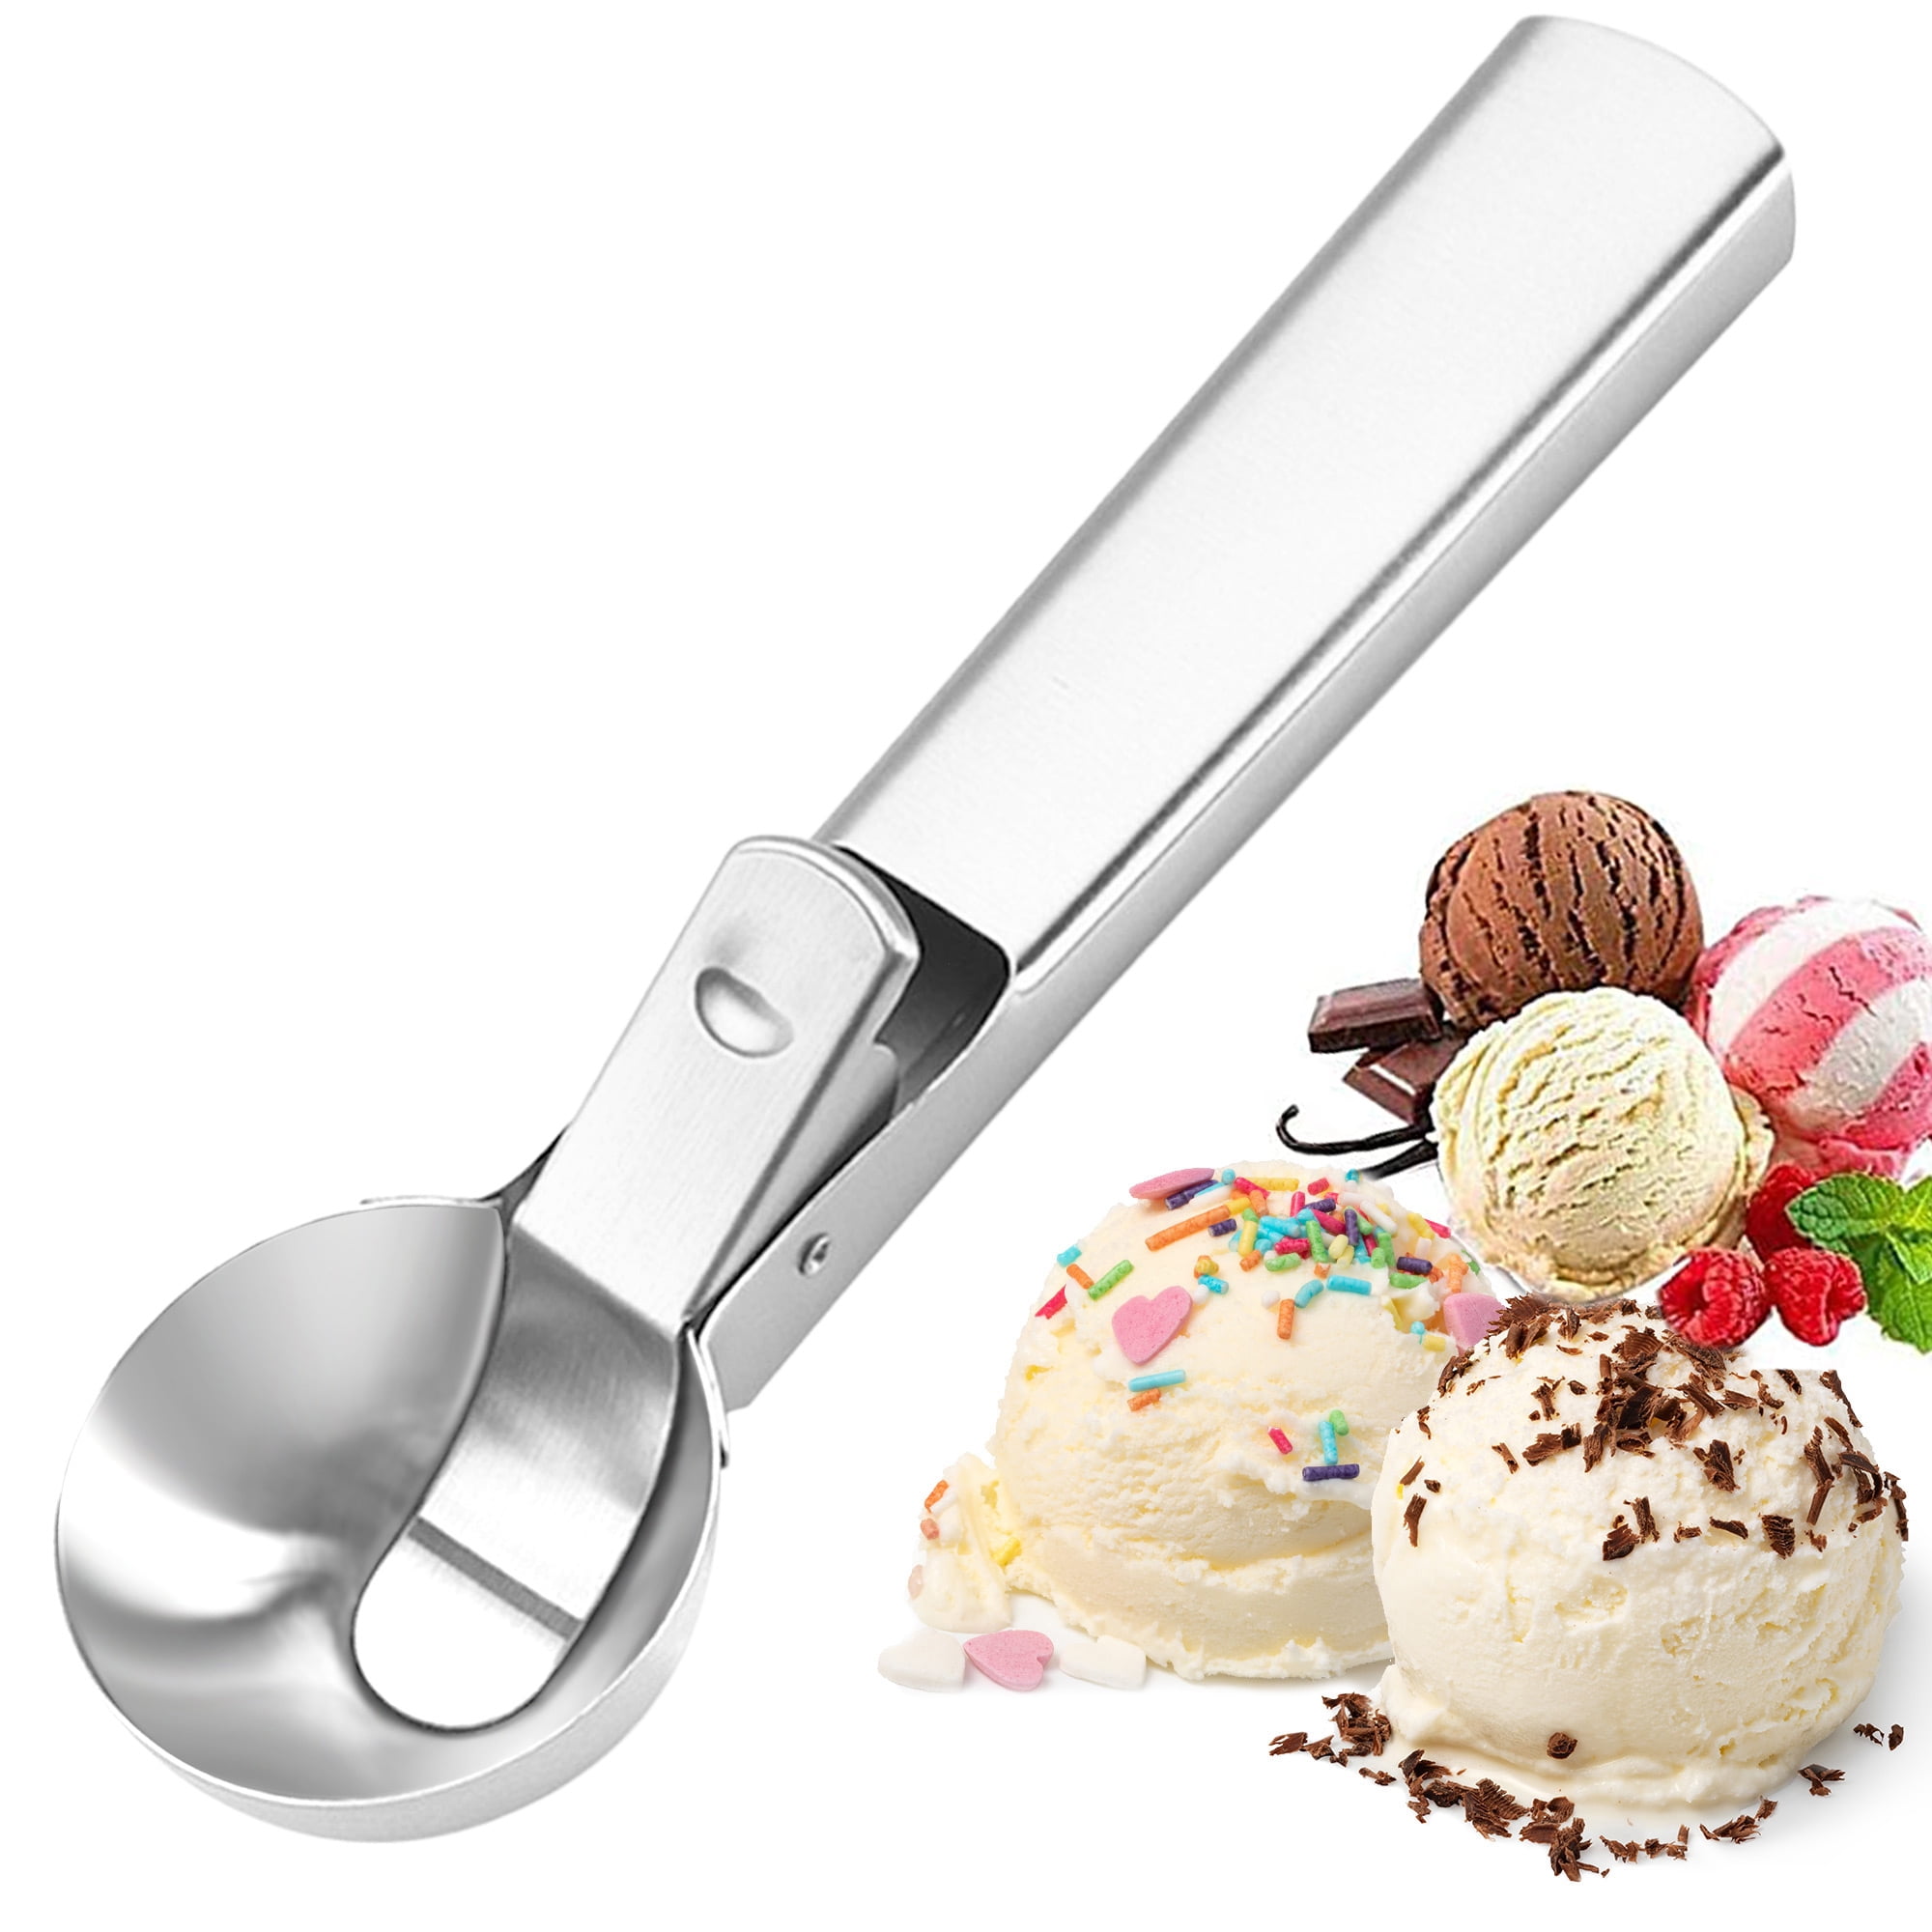 Ice Cream Scoop with Trigger, Small Size Cookie Scoop for Baking, Stainless  Steel Ice Cream Scooper for Kids, Melon Baller Cookies Scoop - 1.5 Tbsp